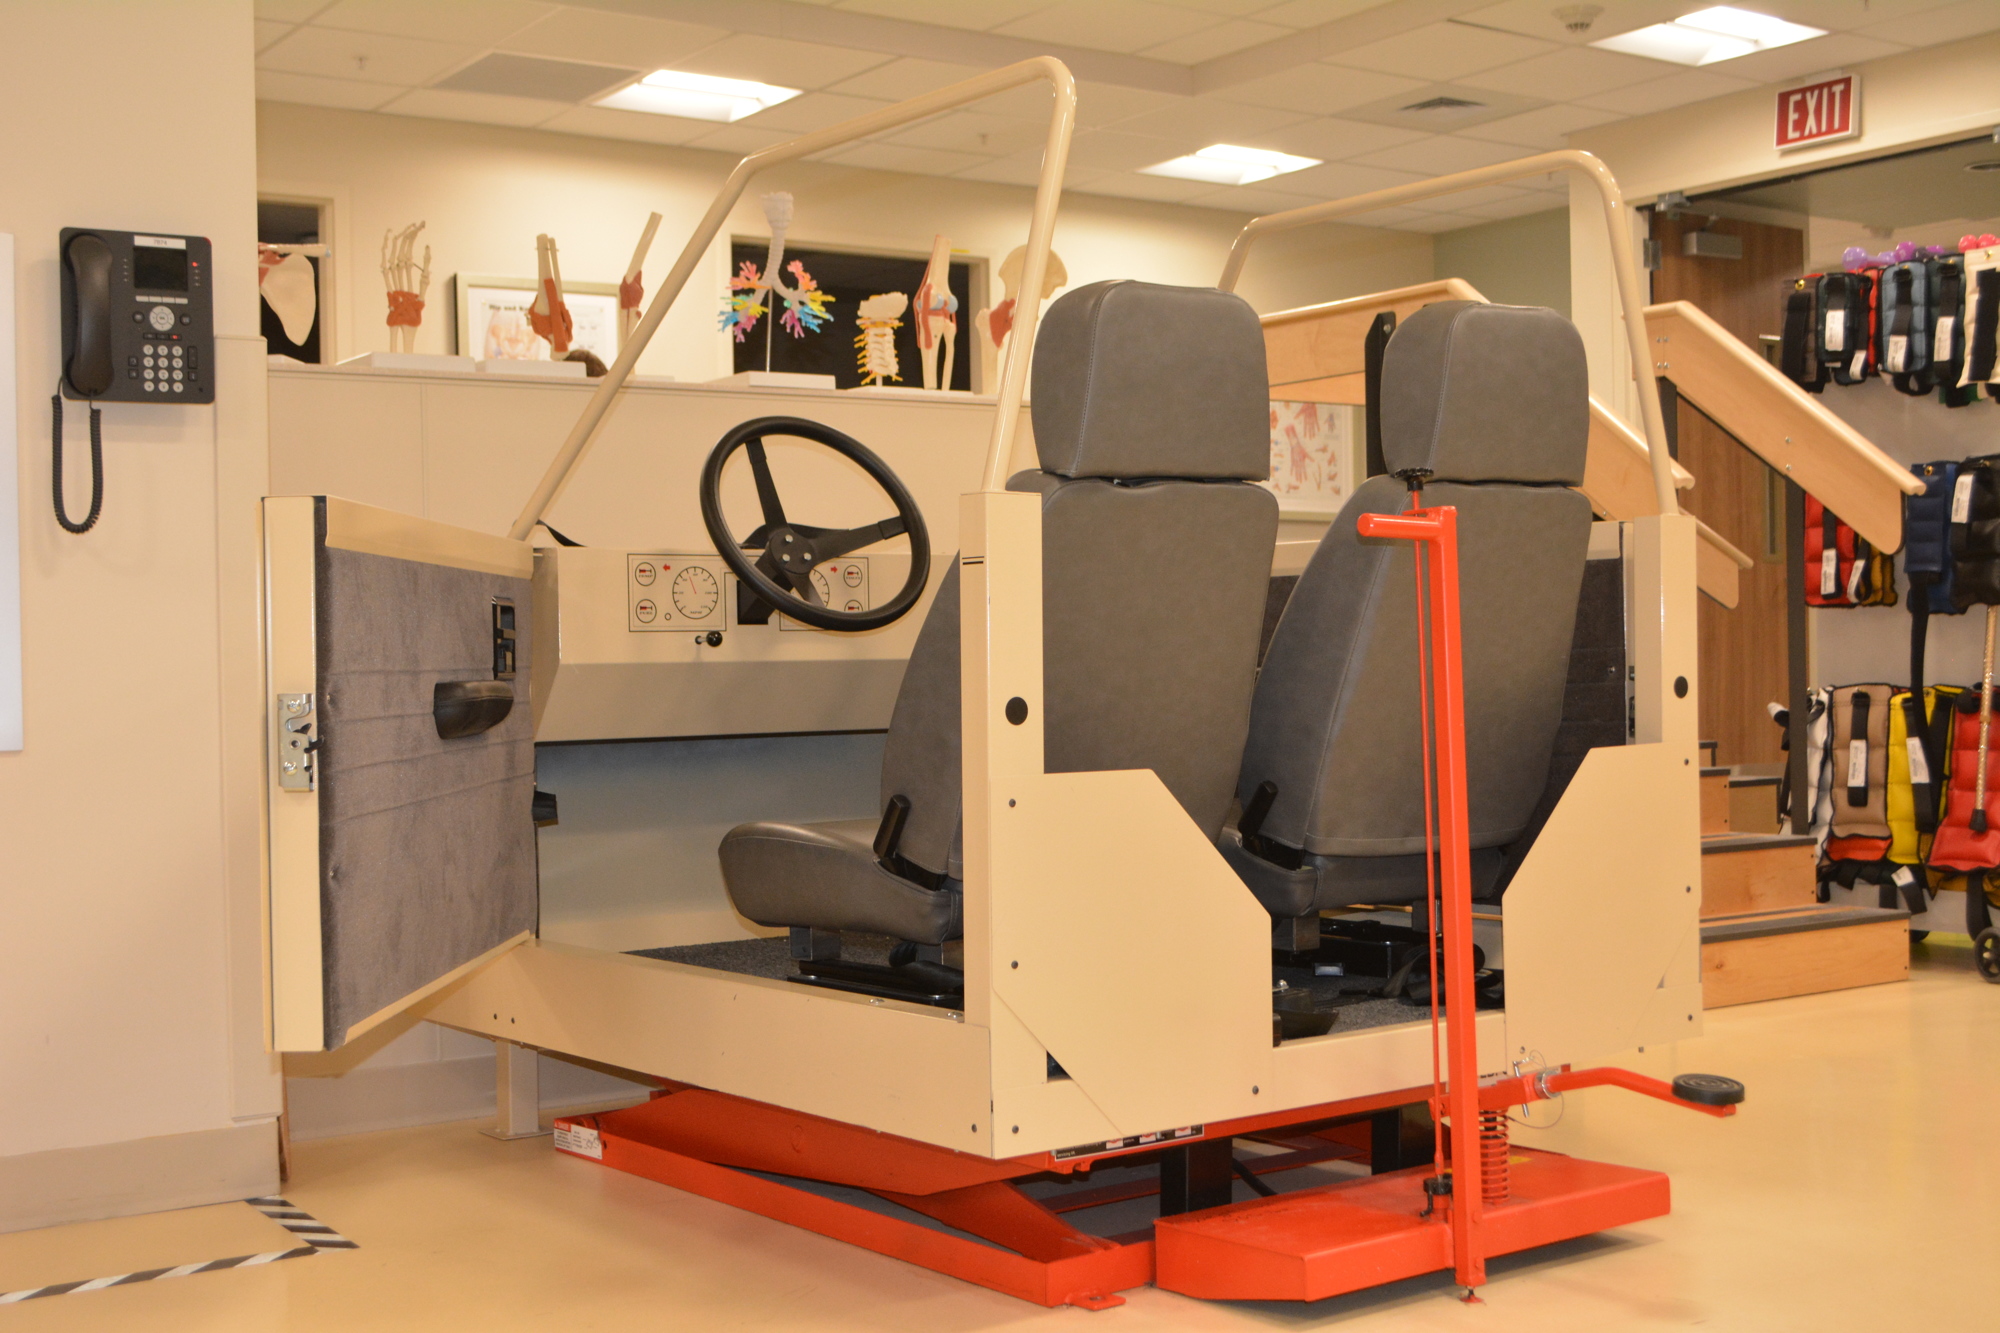 Patients use this structure to practice getting in and out of the car. The device's height can be adjusted to practice for vehicles of many sizes.